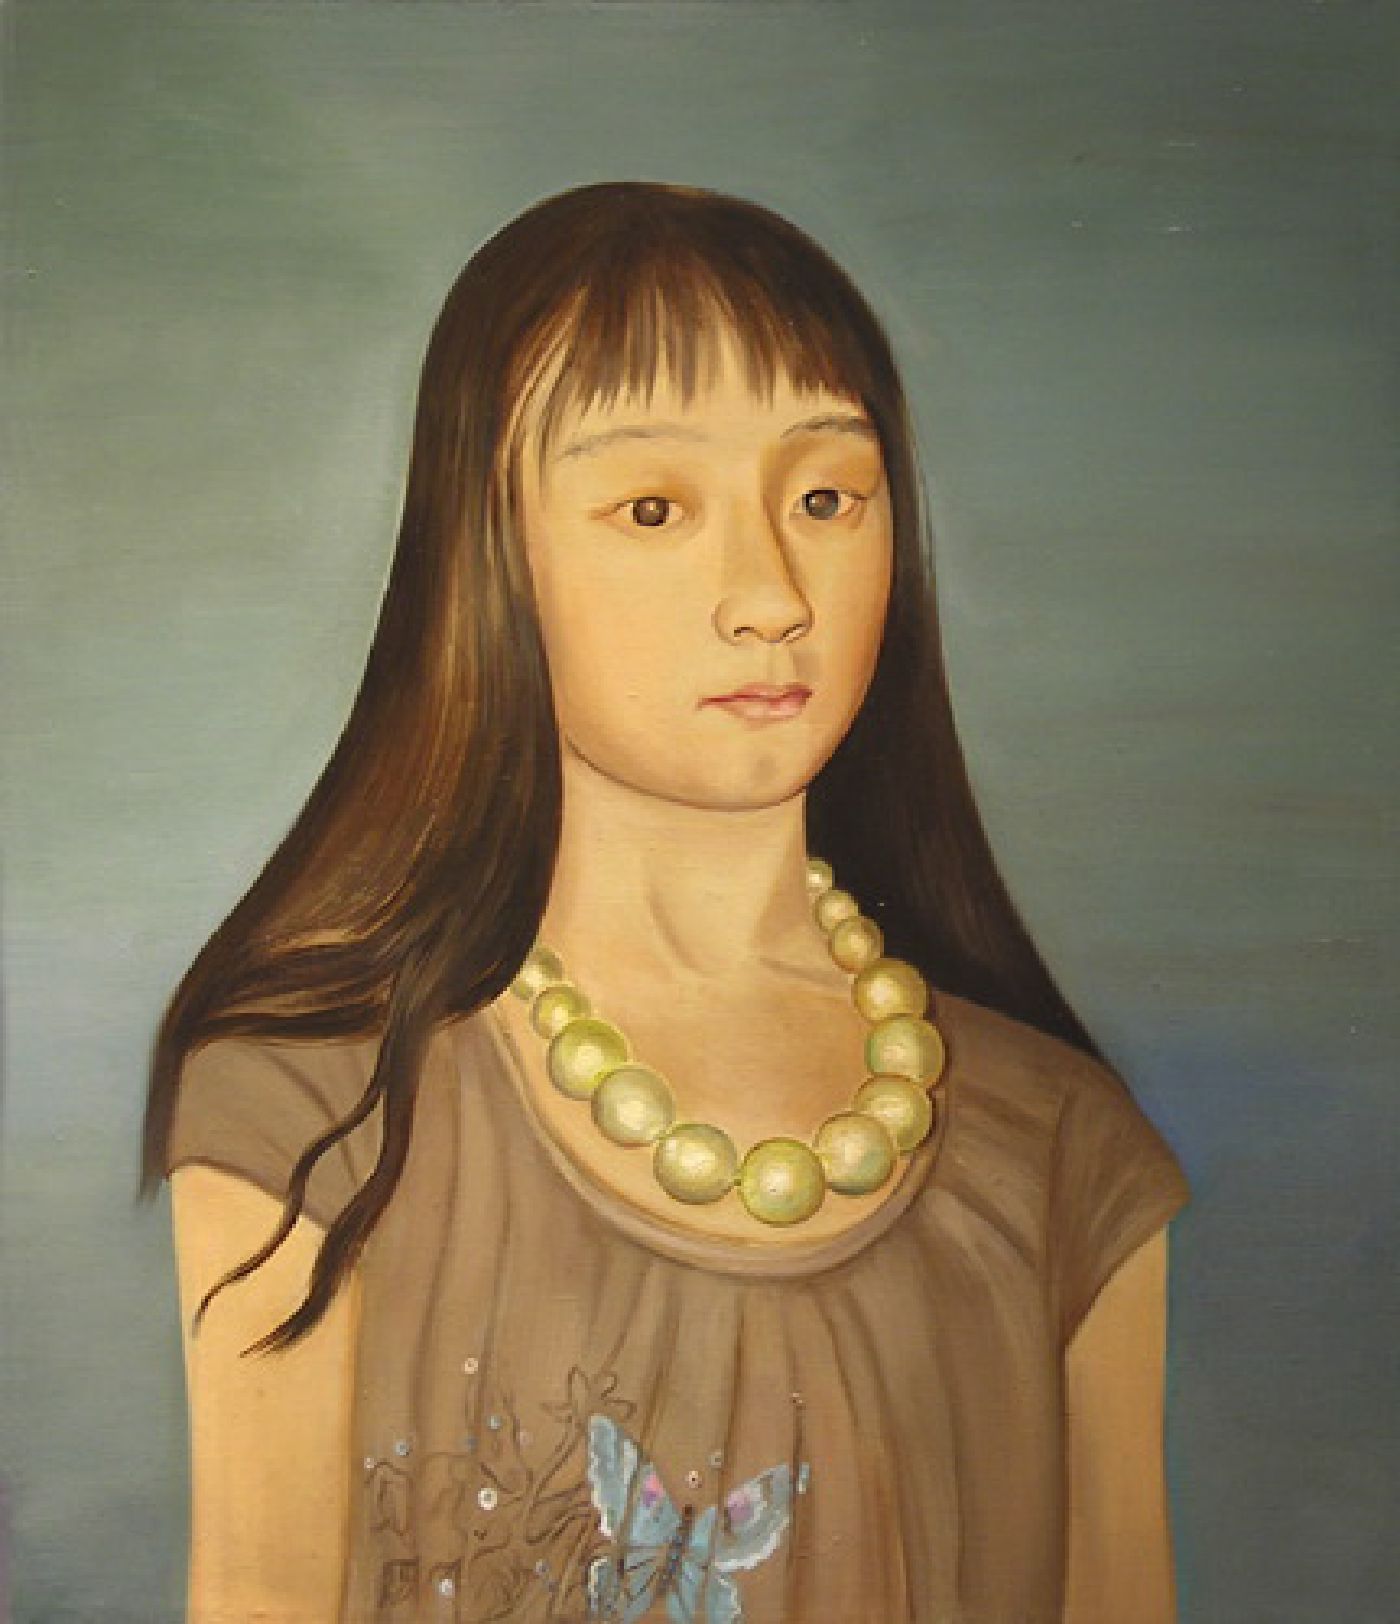 So Much Younger Then (Isabel with Big Beads)- oil on linen, 26 x 22 inches, 2009